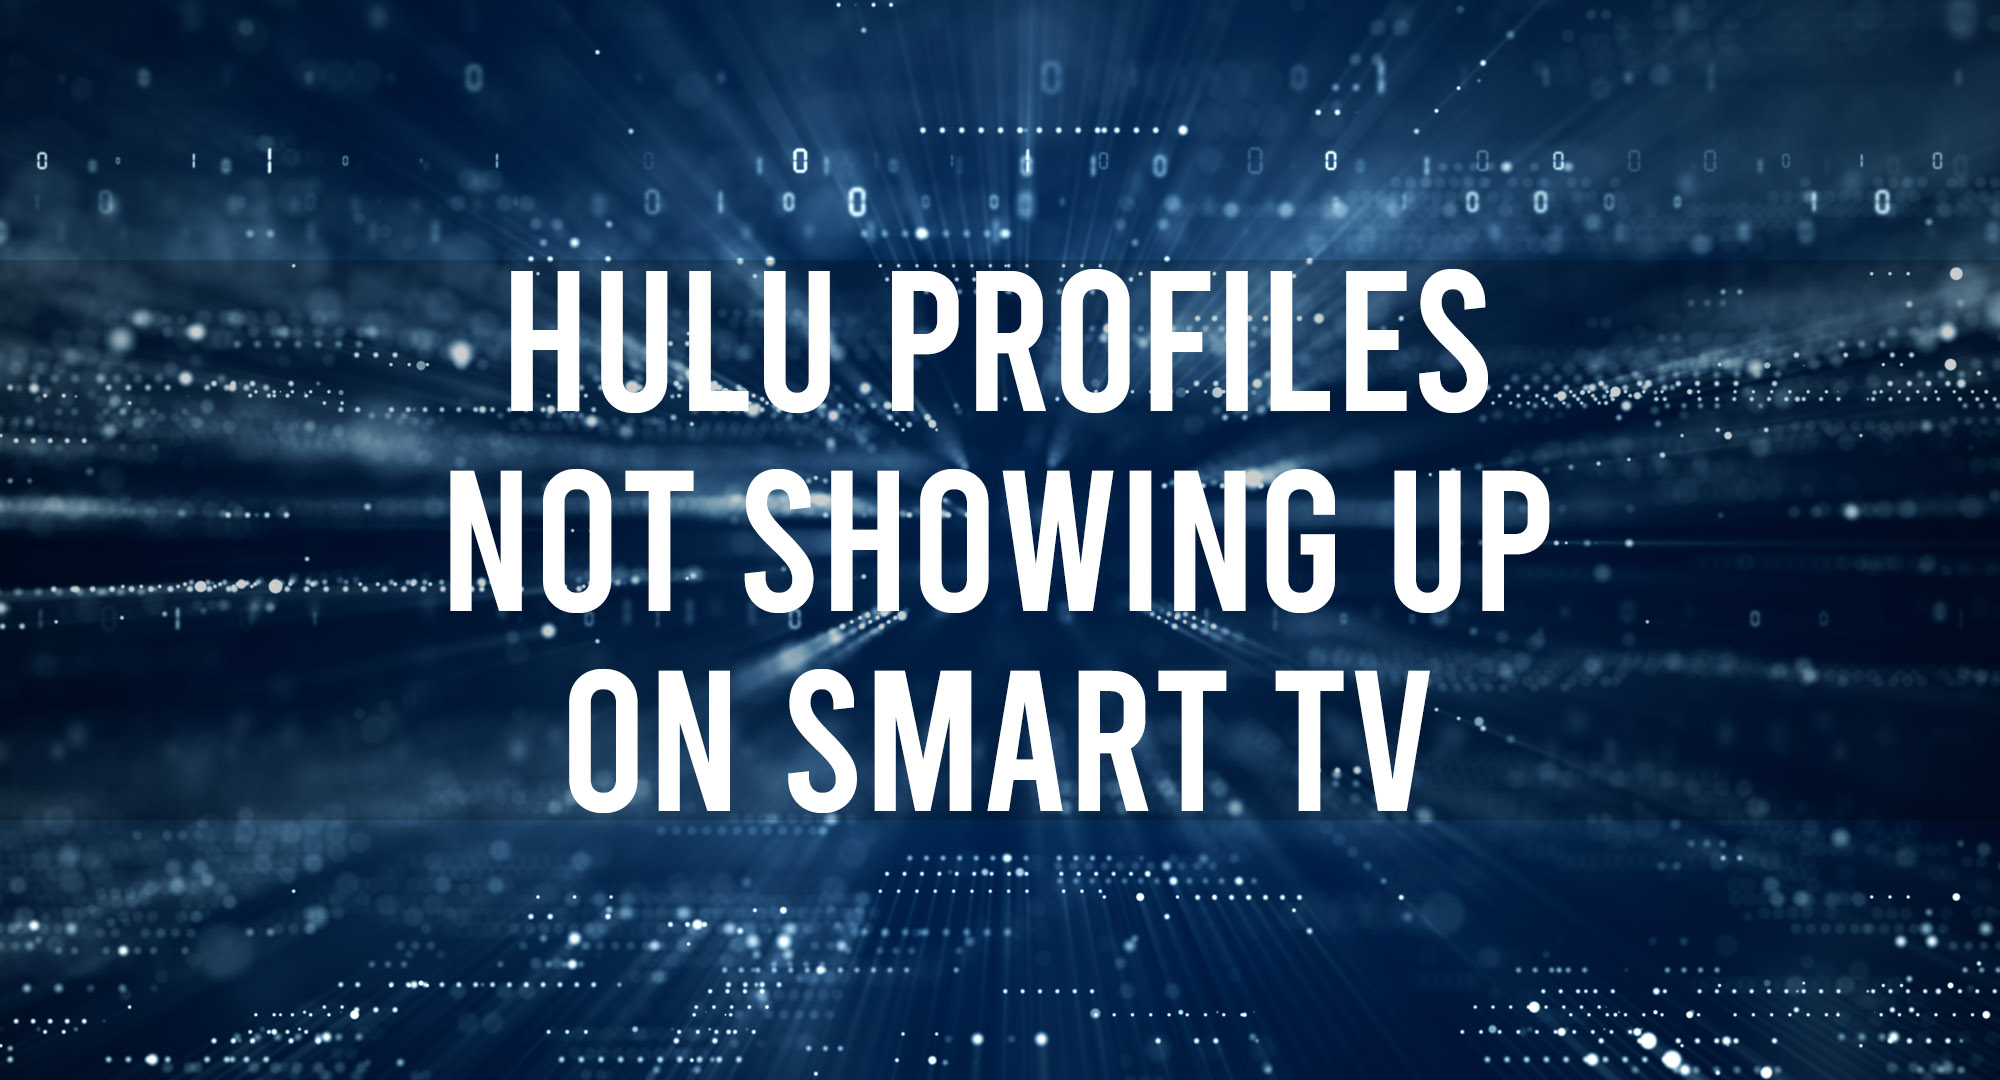 Hulu Profiles Not Showing Up On Smart TV